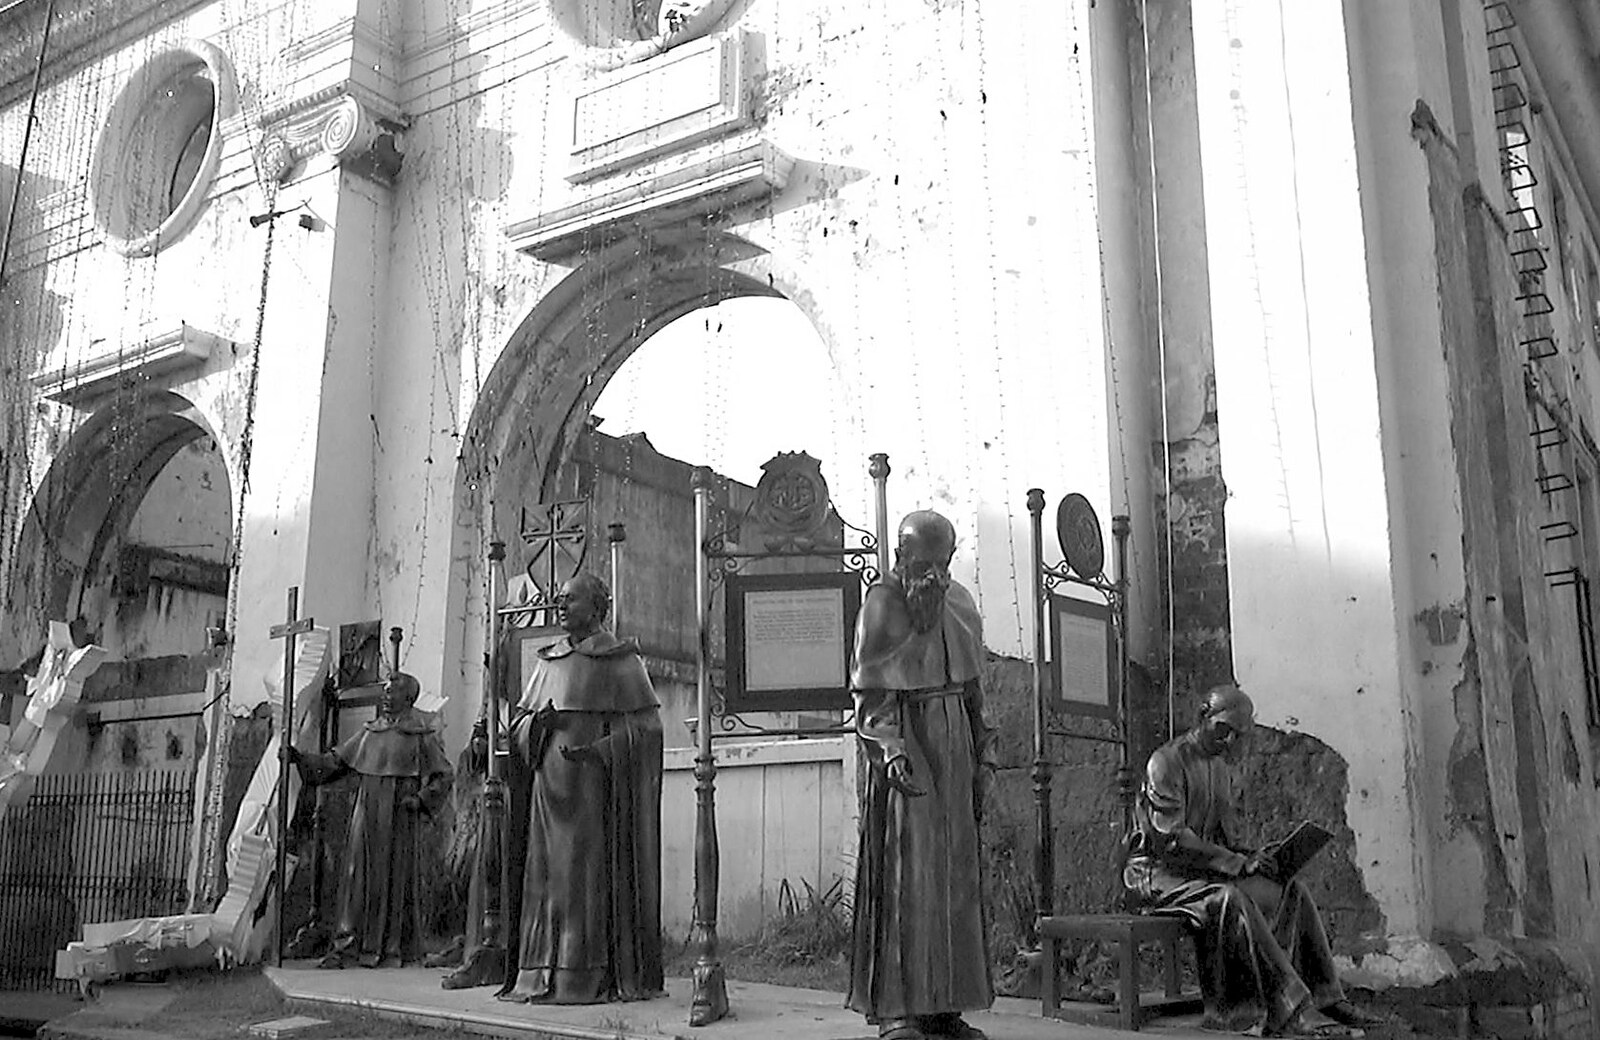 A collection of statues on a street corner from A Postcard From Manila: a Working Trip, Philippines - 9th July 2004